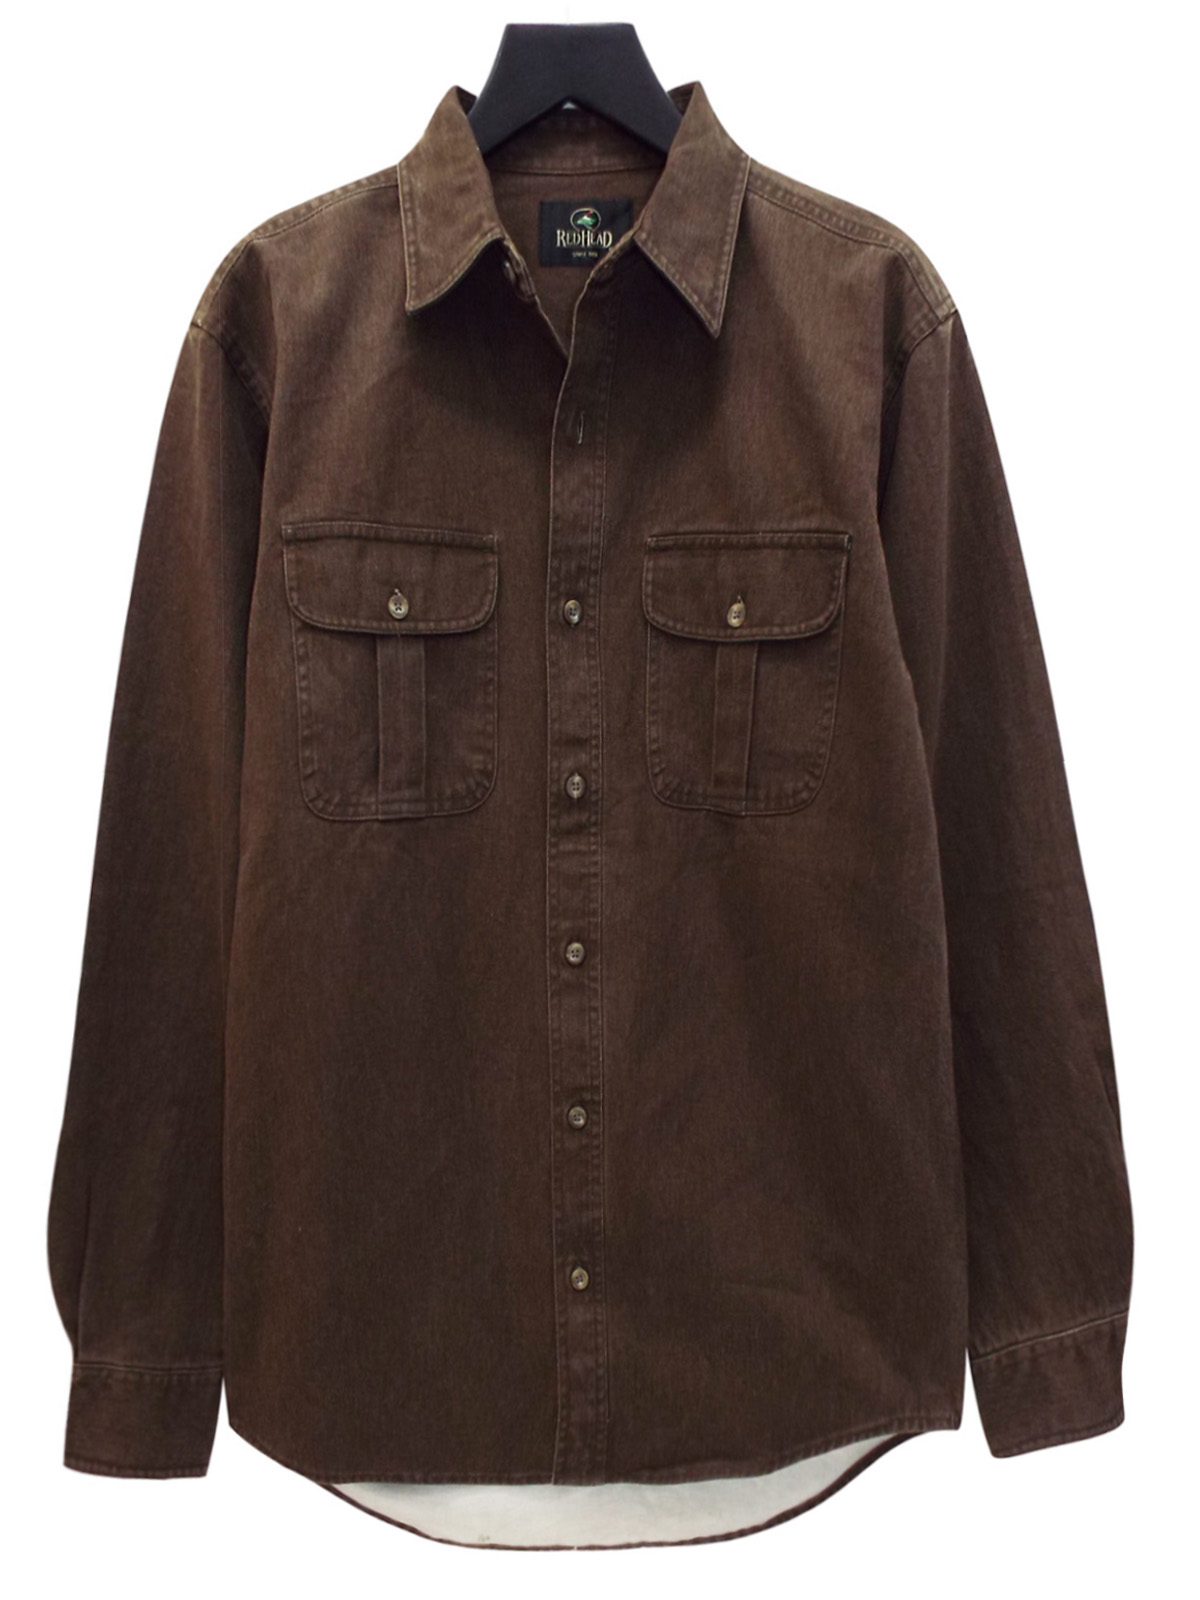 Red Head - - RedHead BROWN Mens Meadowlands Woven Twill Shirt - Size ...